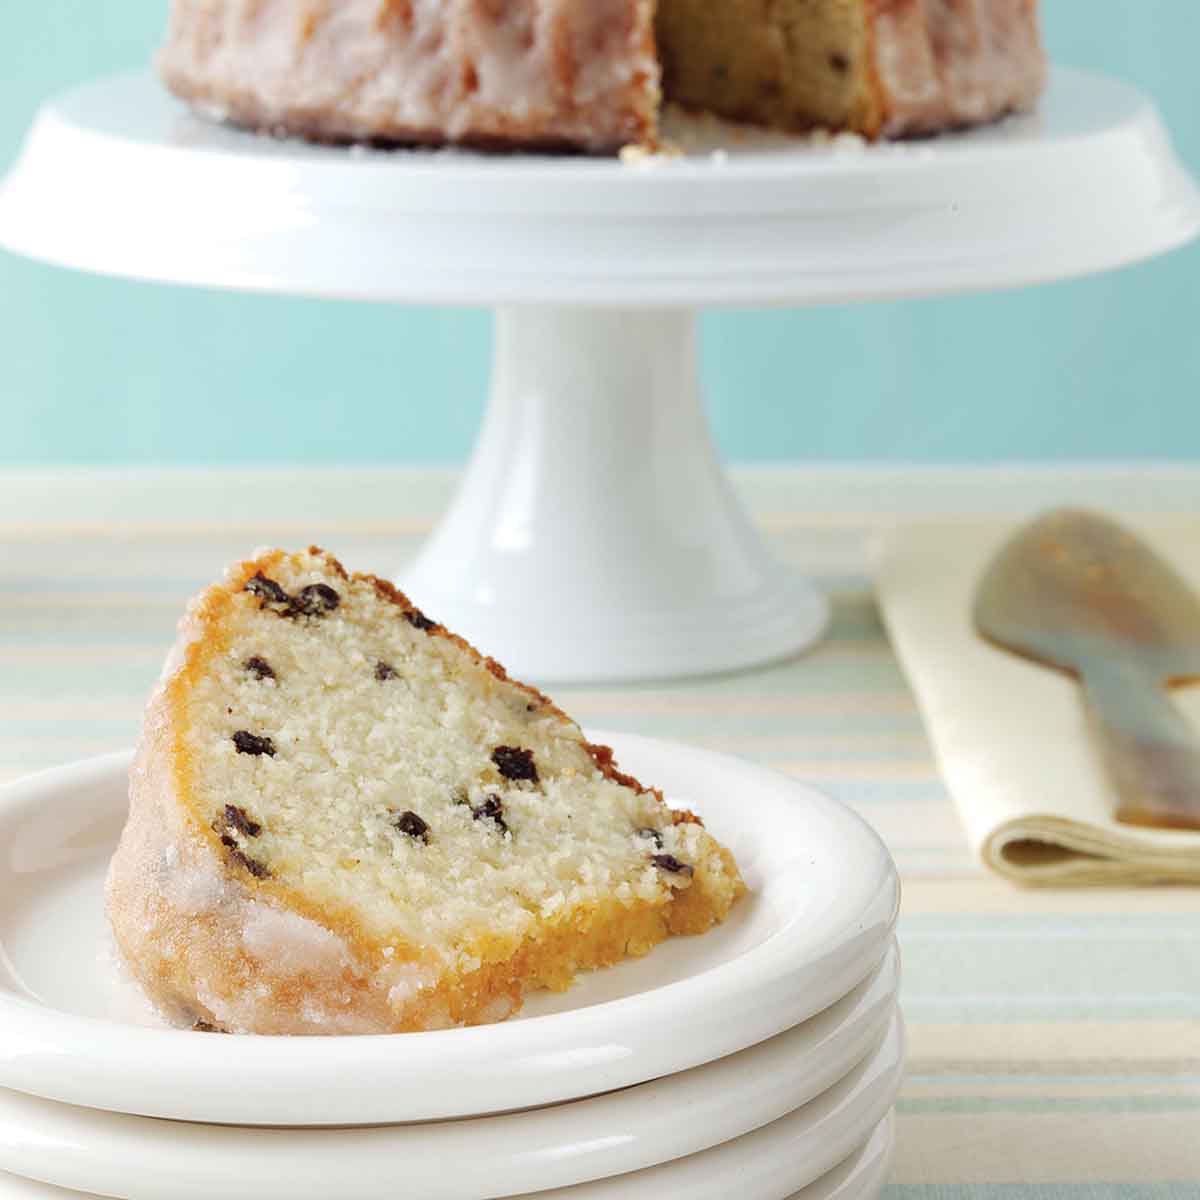 A plate with a slice of pound cake with currants, and a cake stand in the background with the remaining cake.